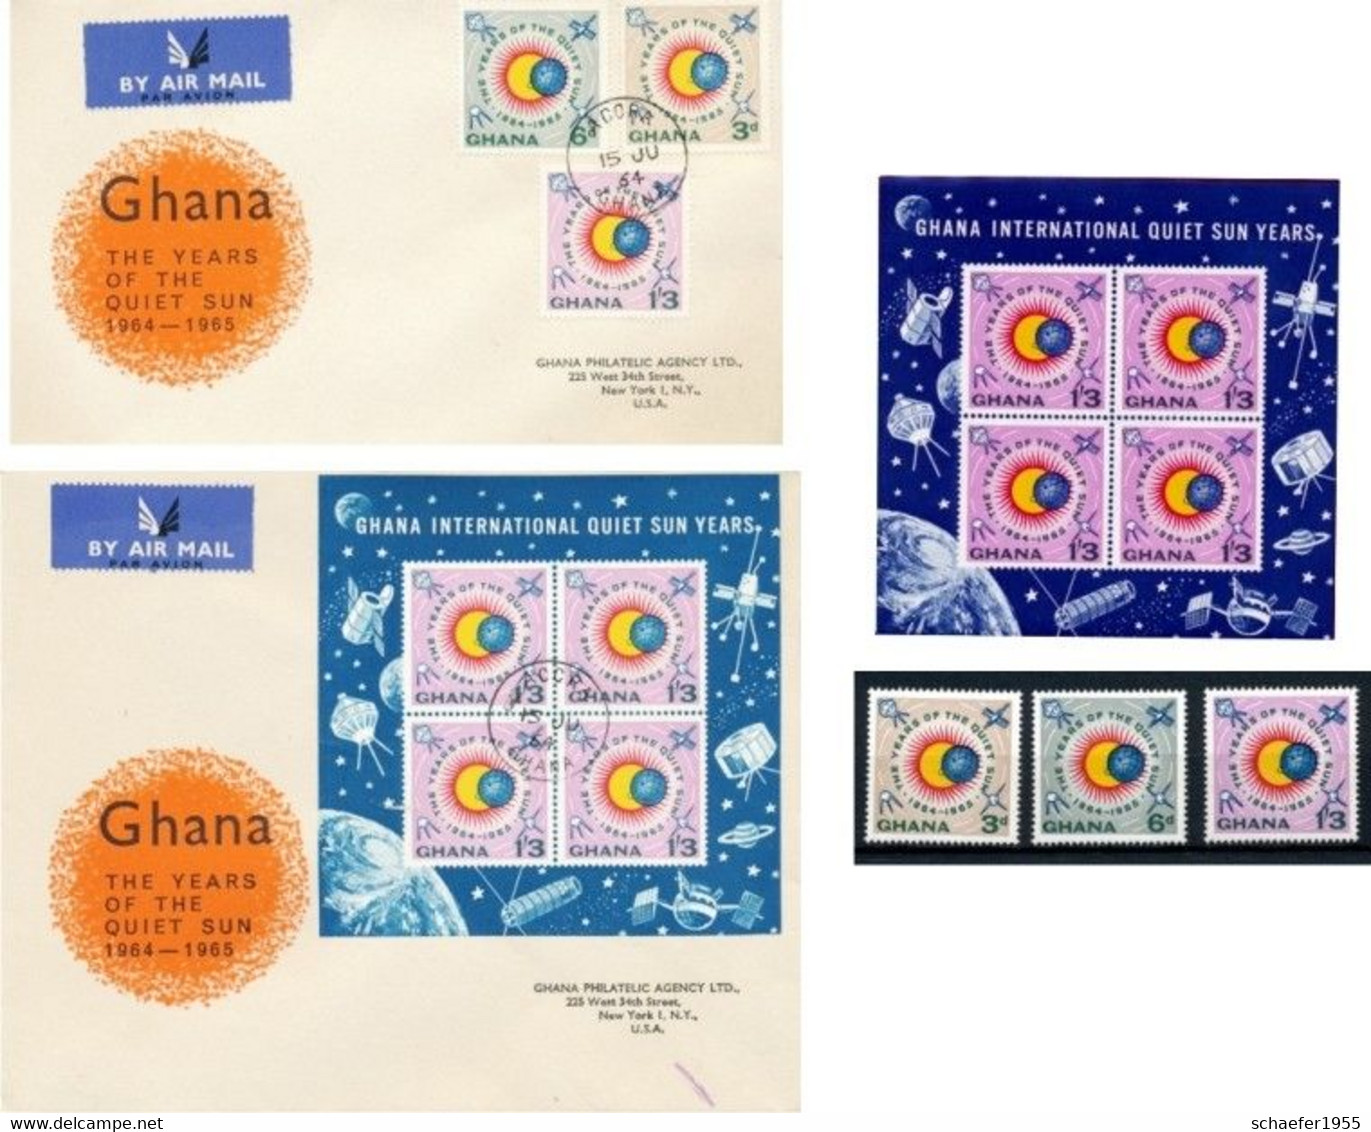 Ghana 1965 Quiet Sun 2x FDC + Stamps Perf. + Bloc Perf. - Asia